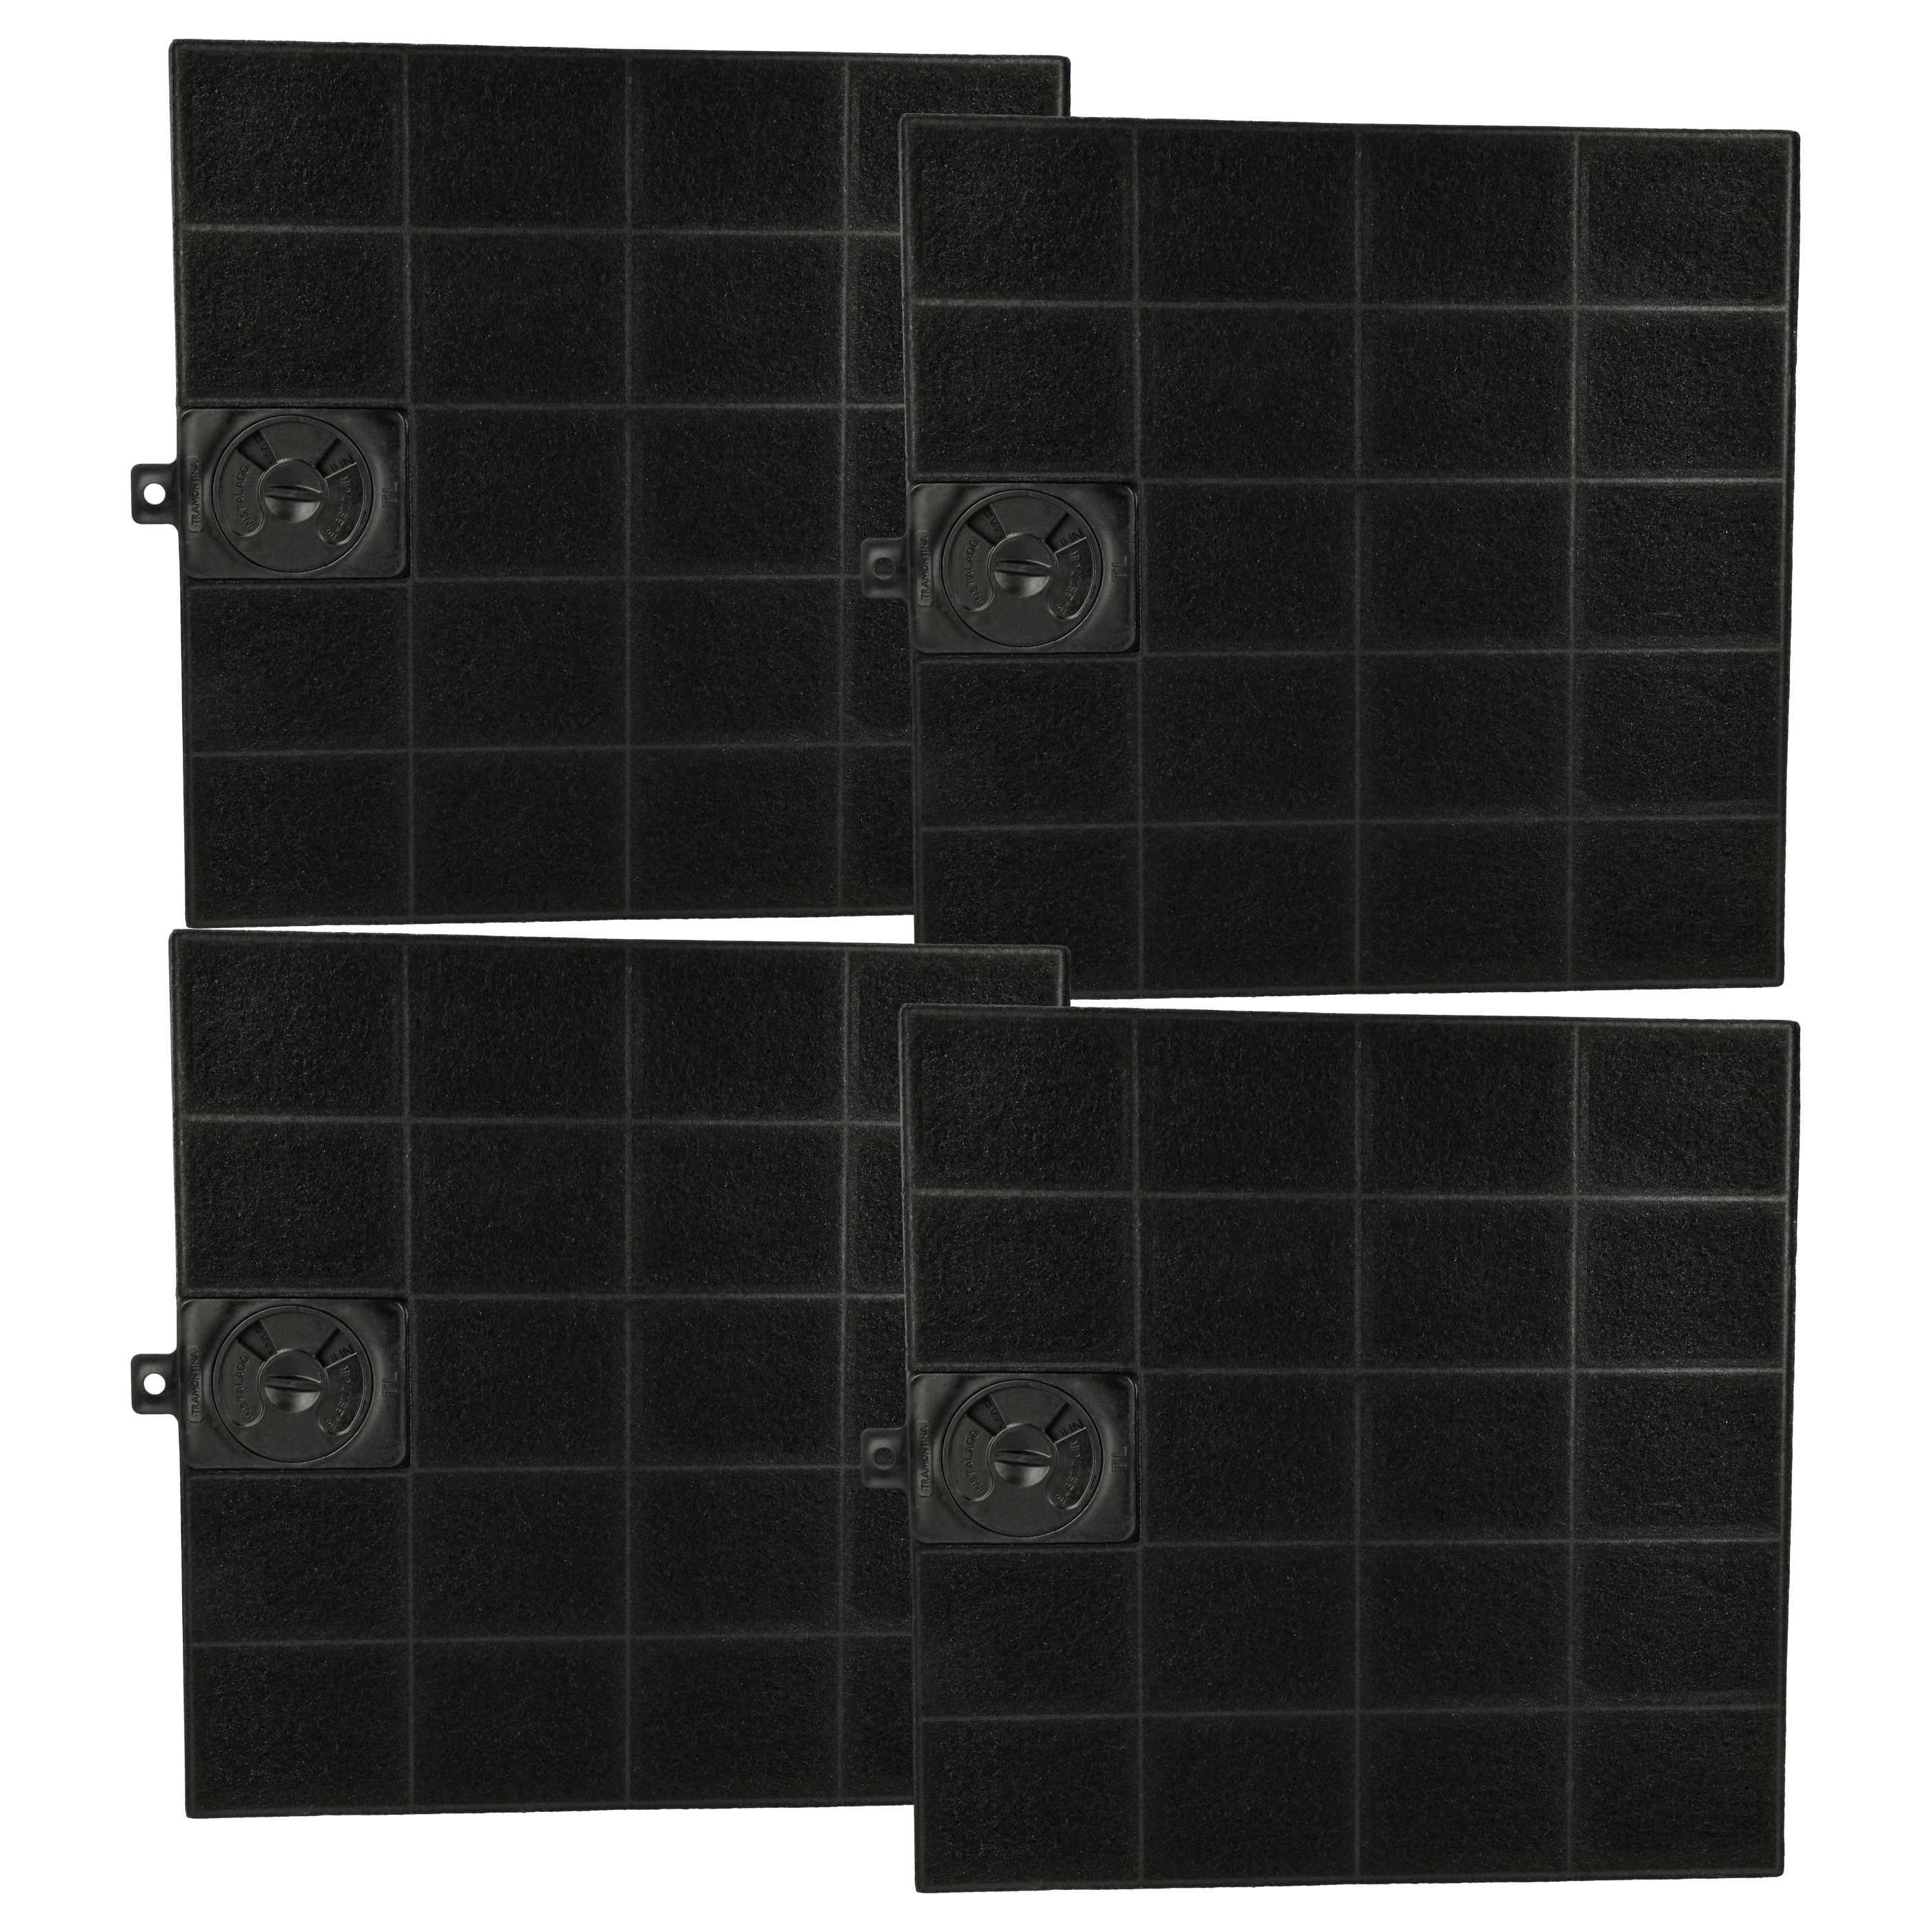 4x Activated Carbon Filter as Replacement for Gorenje 315275 for Gorenje Hob